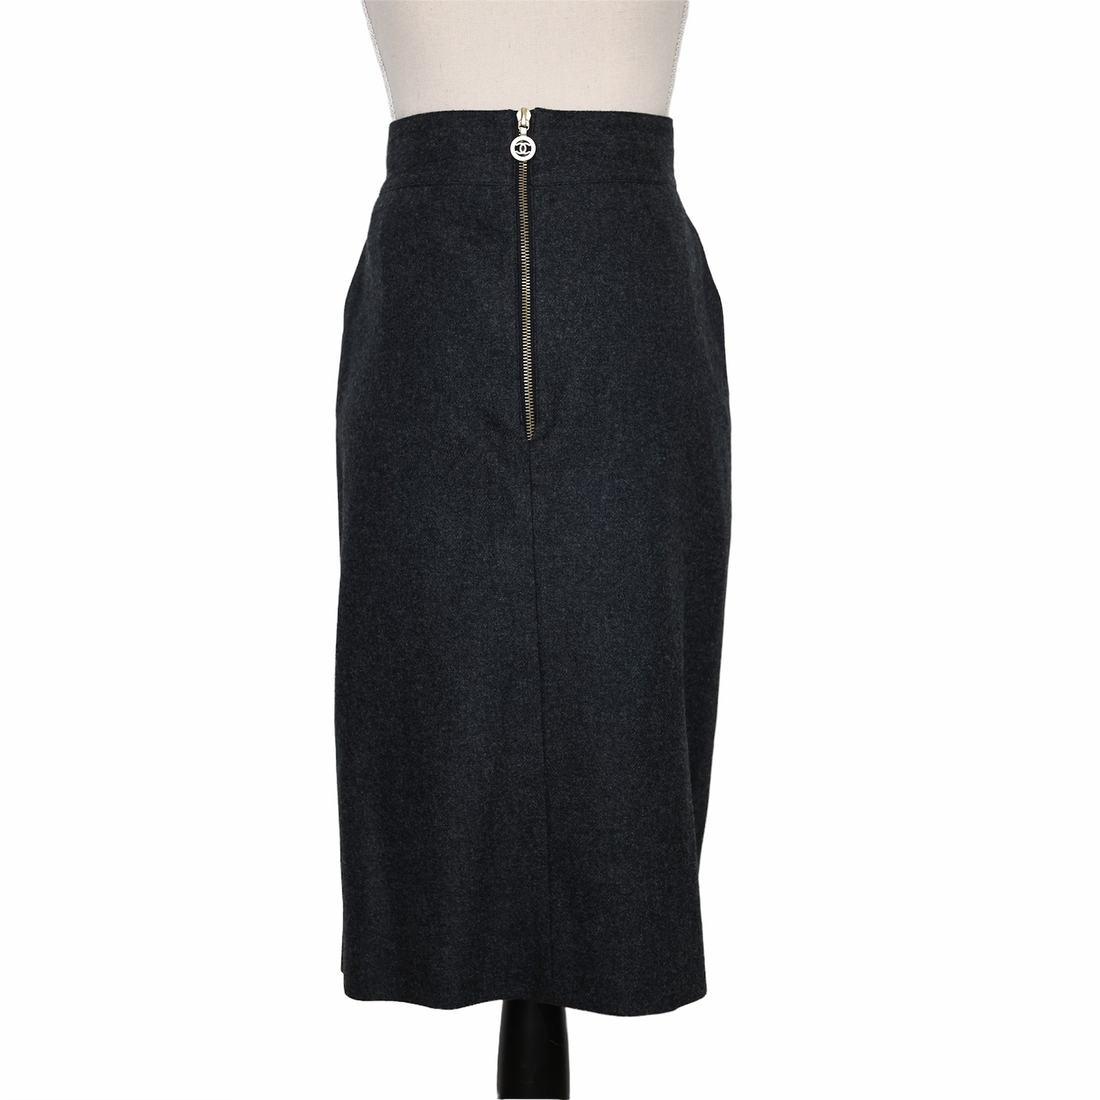 Chanel wool skirt with zip